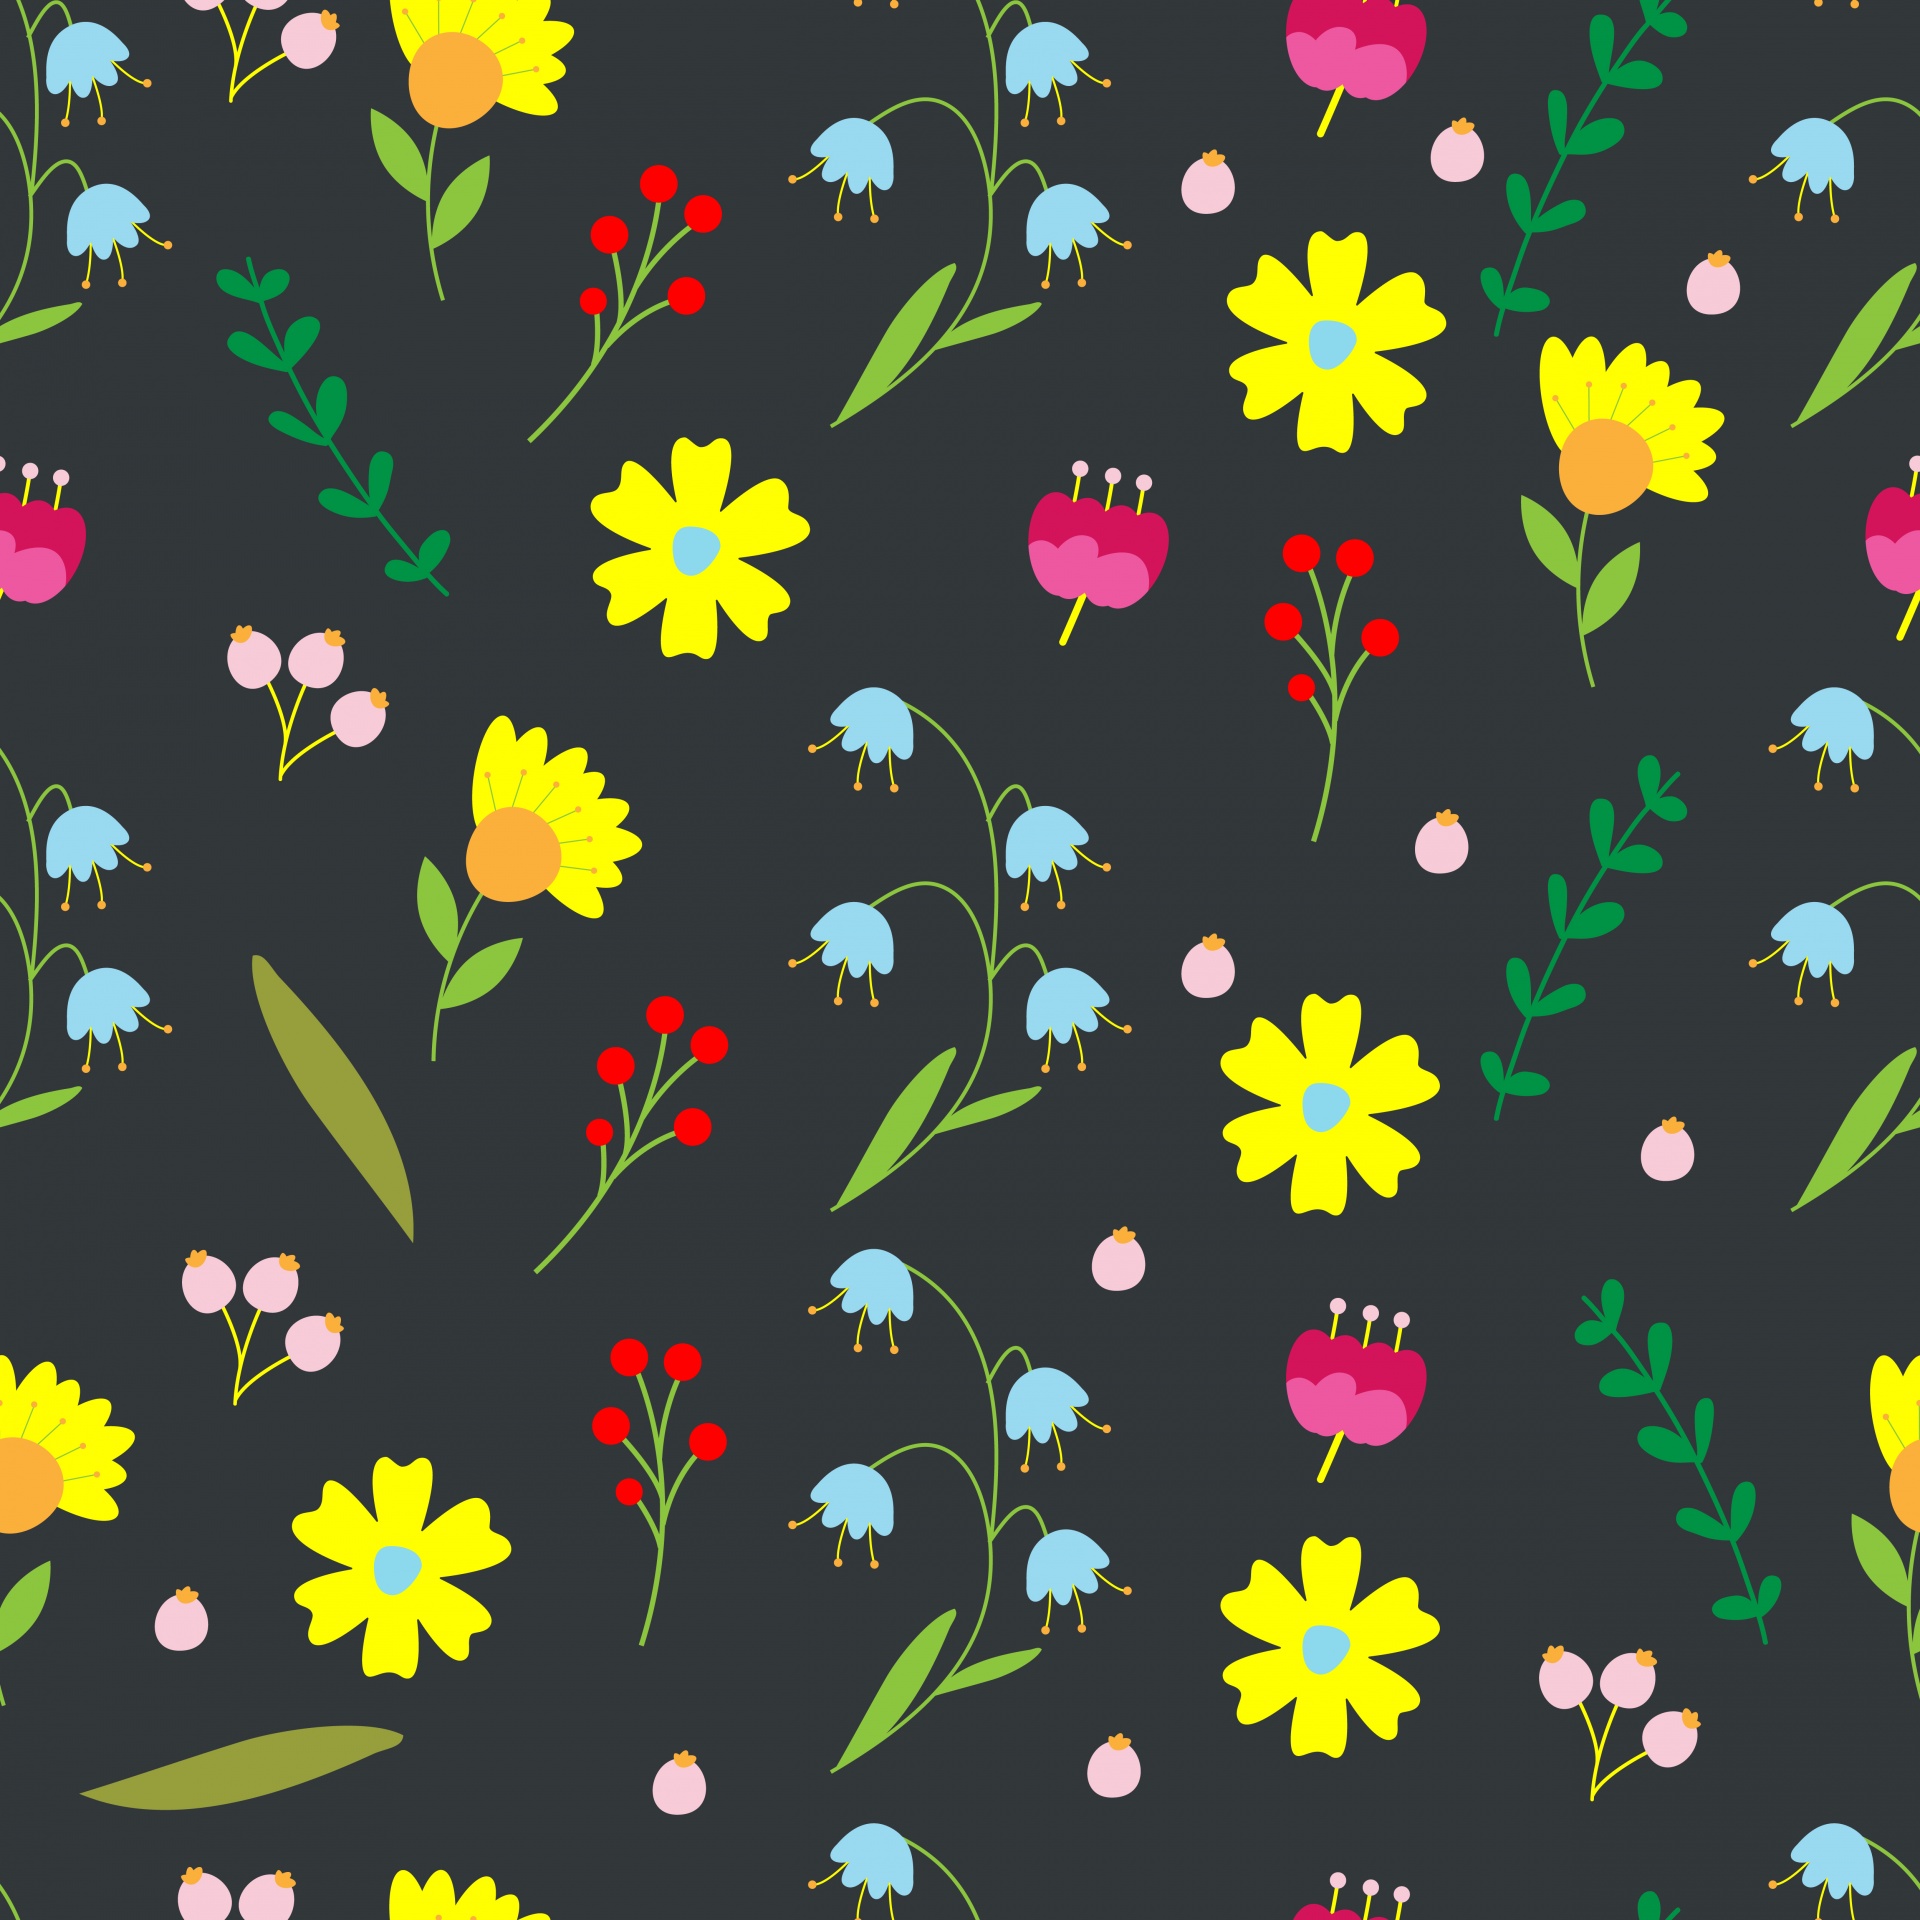 Retro, vintage style floral pattern seamless wallpaper background